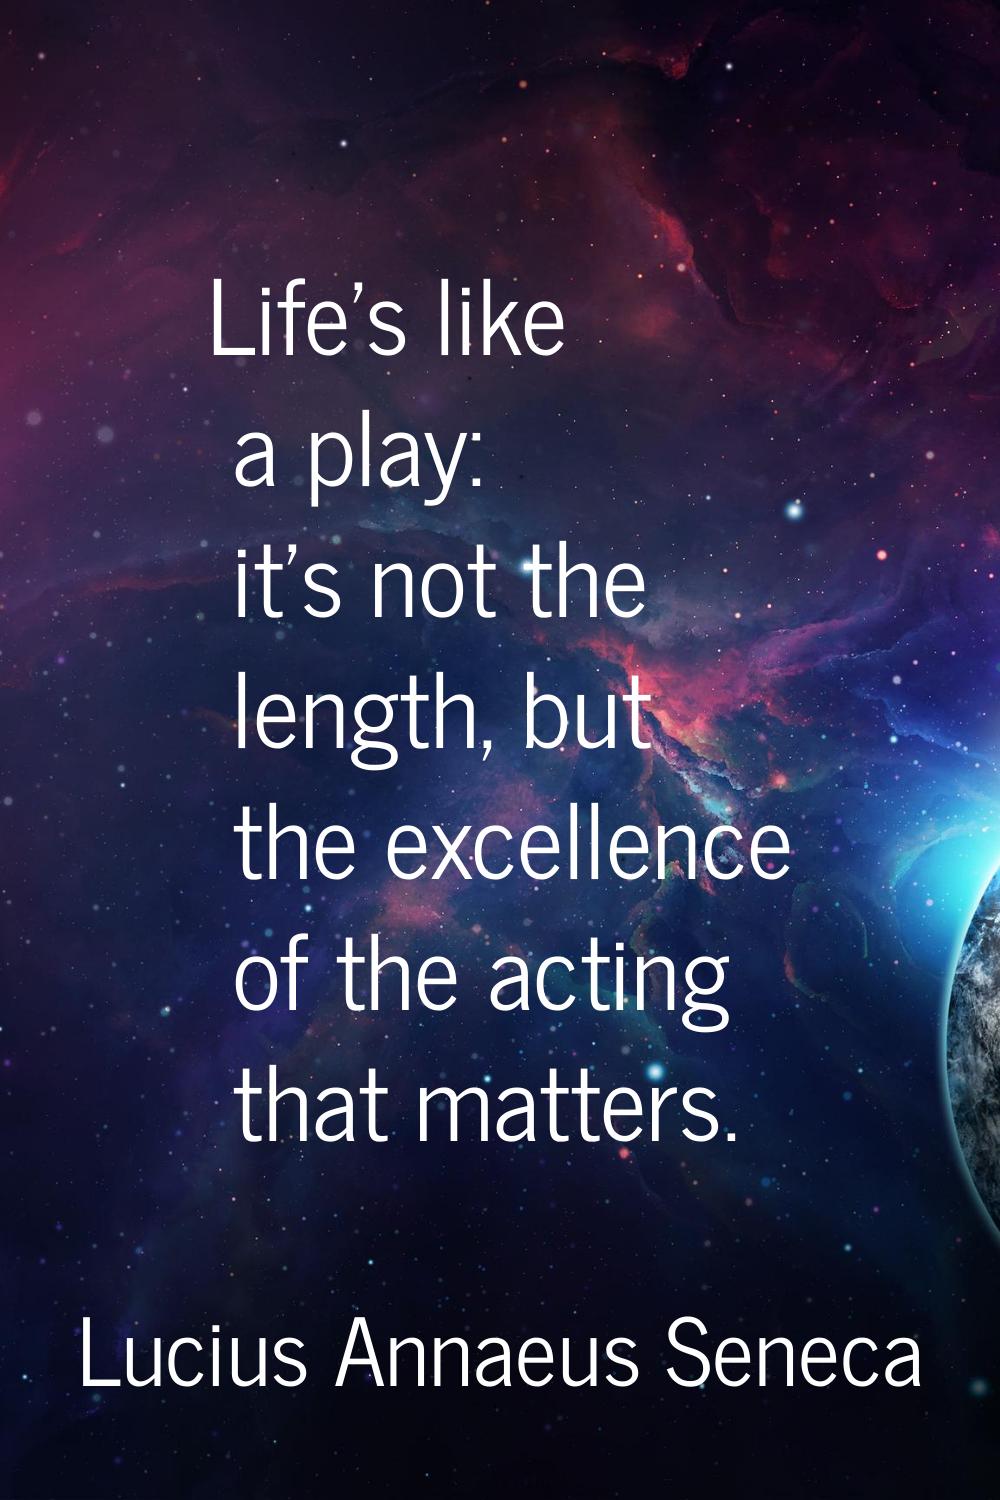 Life's like a play: it's not the length, but the excellence of the acting that matters.